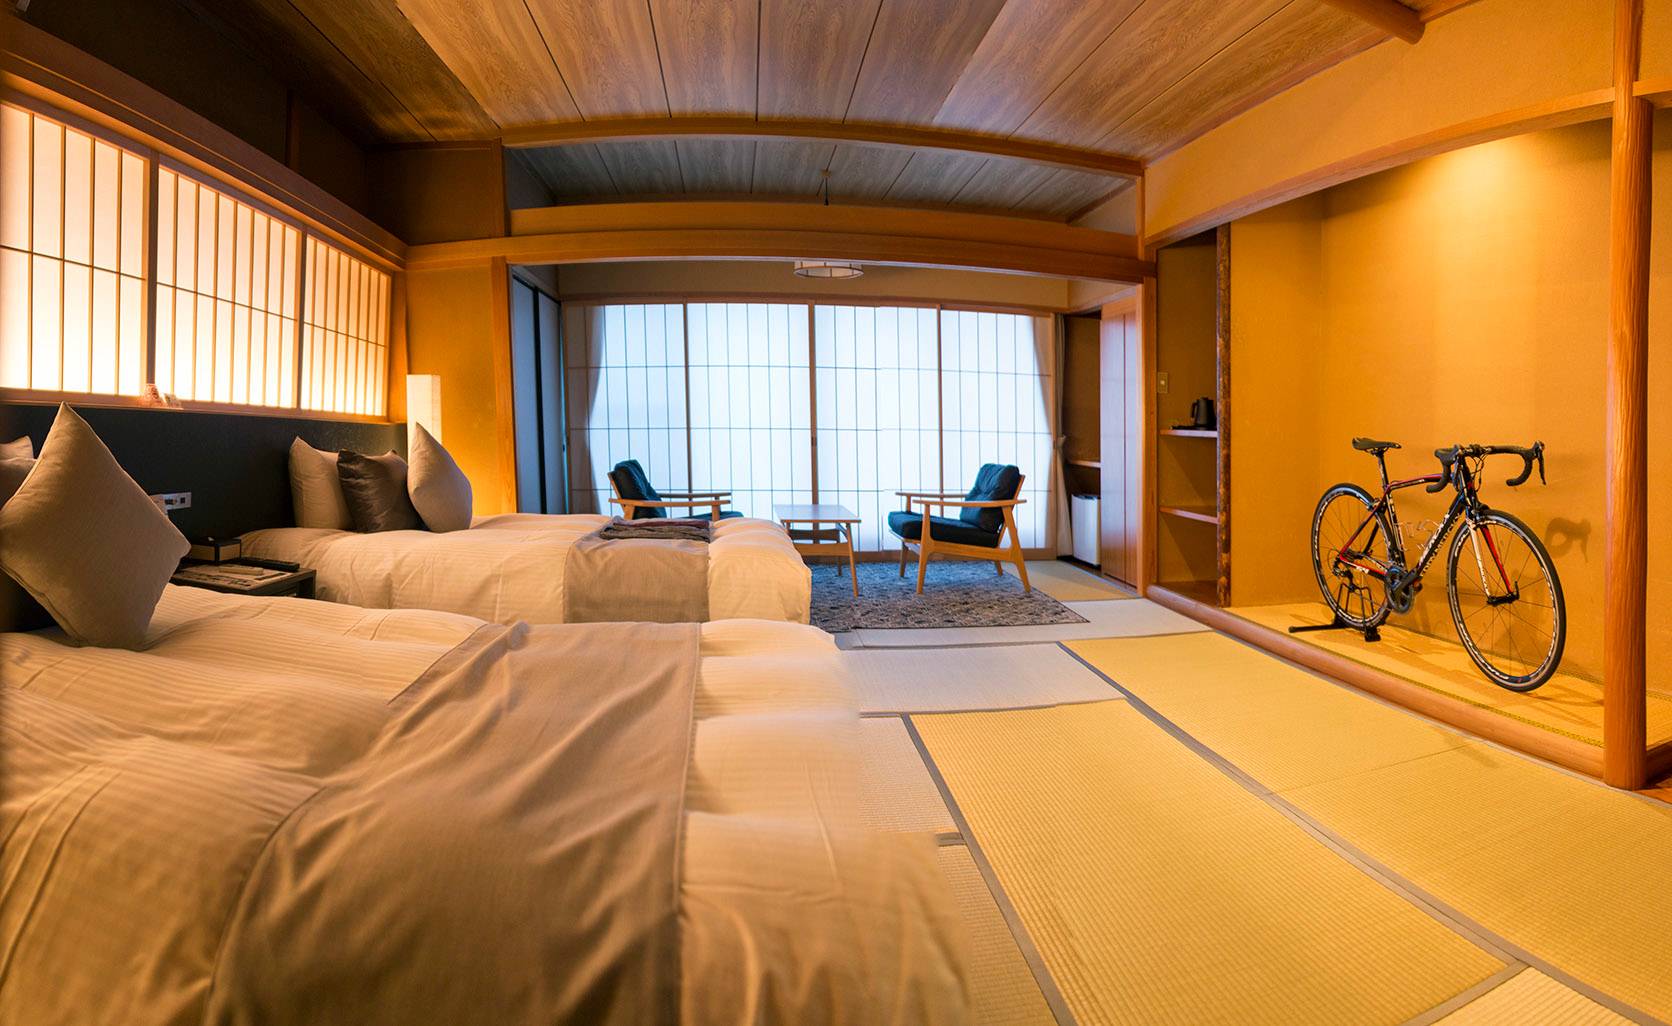 The rooms at Kona Stay hotel in the city of Izunokuni, Shizuoka Prefecture, have a storage space for bicycles. | ROB GILHOOLY